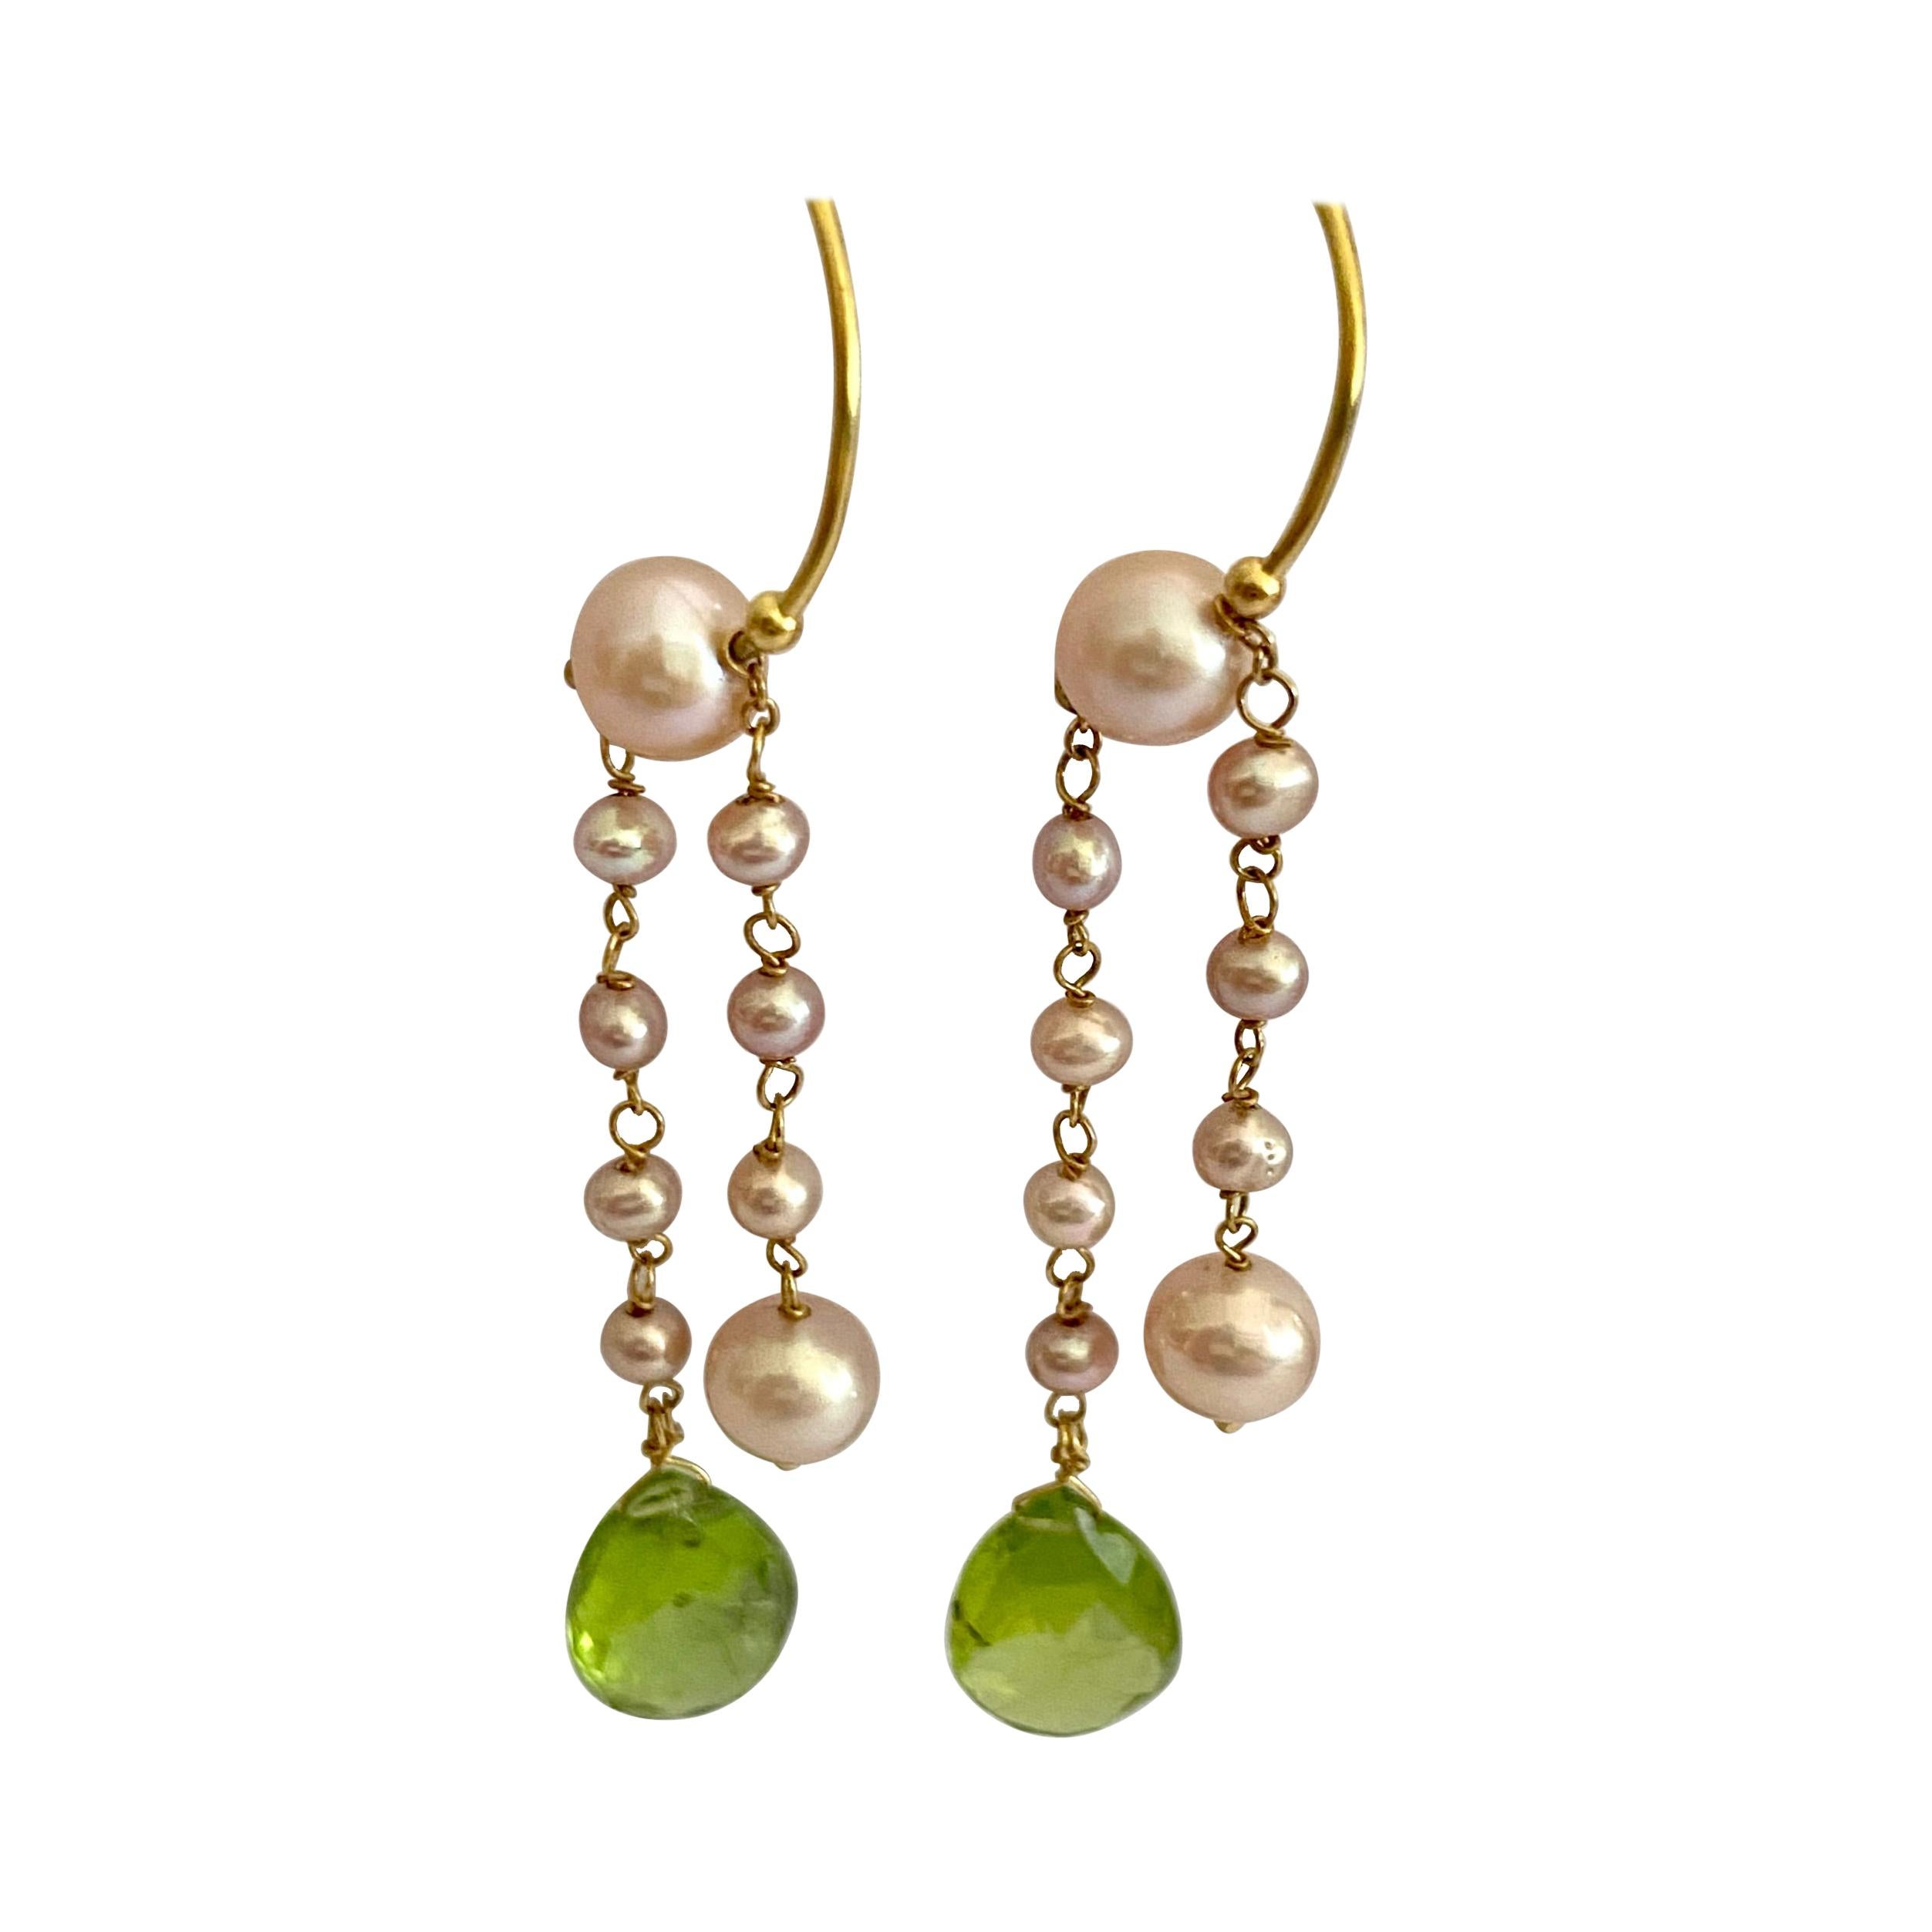 Handmade Earrings, Peridot Stone and 9 Freshwater Cultured Pearls, Made in Italy For Sale